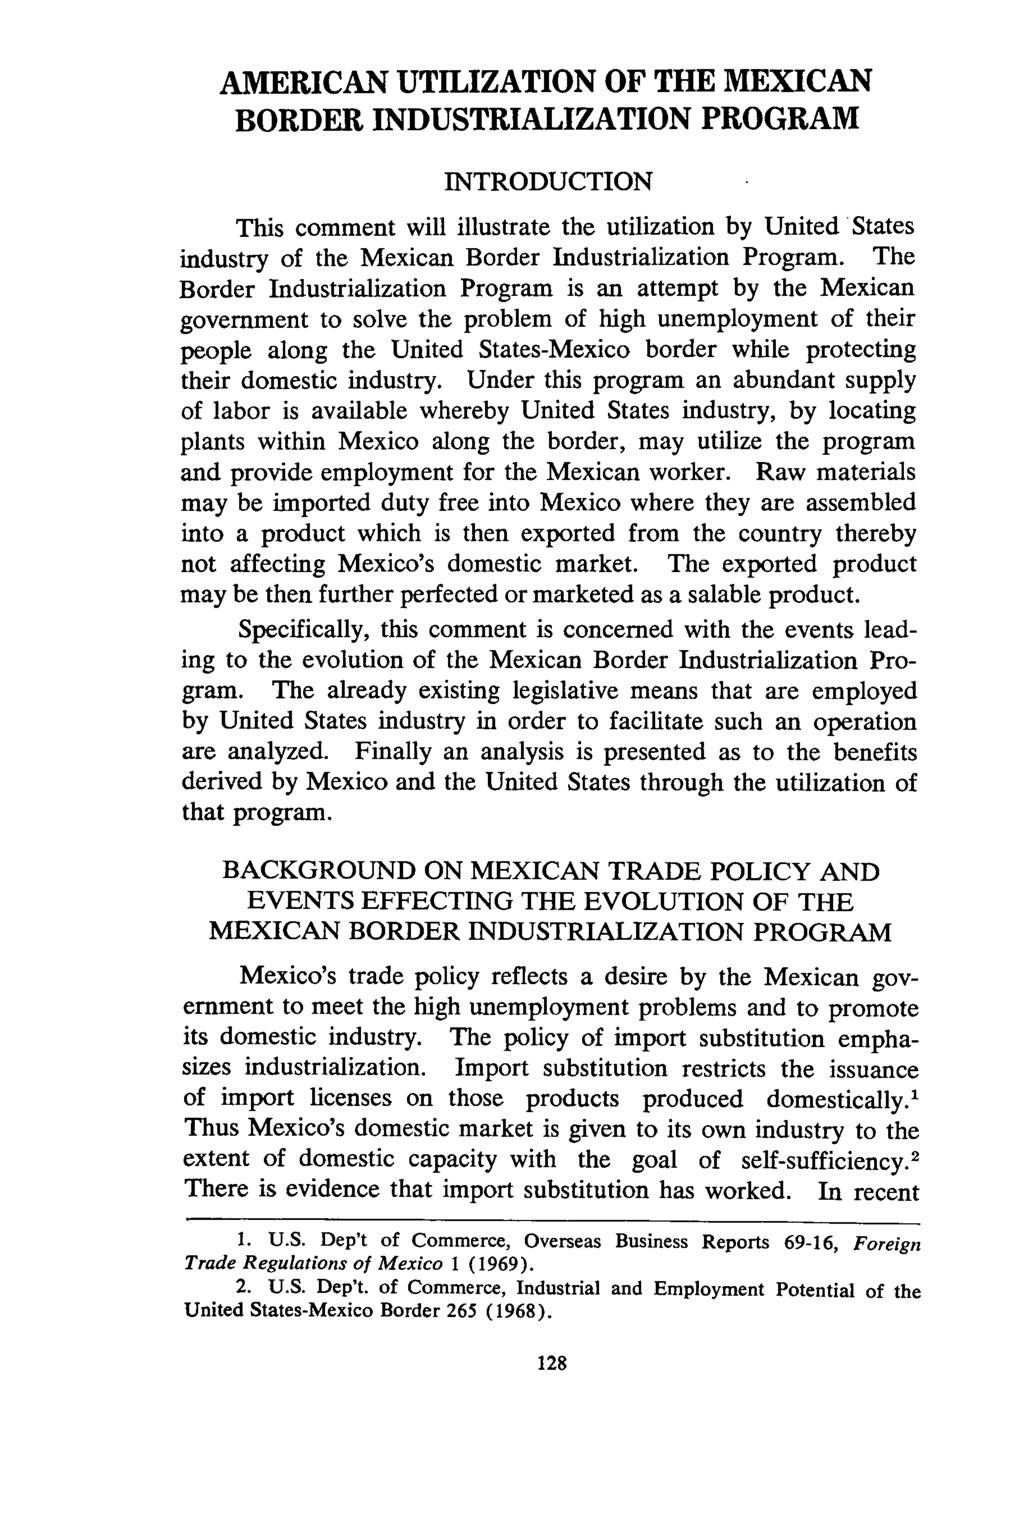 AMERICAN UTILIZATION OF THE MEXICAN BORDER INDUSTRIALIZATION PROGRAM INTRODUCTION This comment will illustrate the utilization by United States industry of the Mexican Border Industrialization